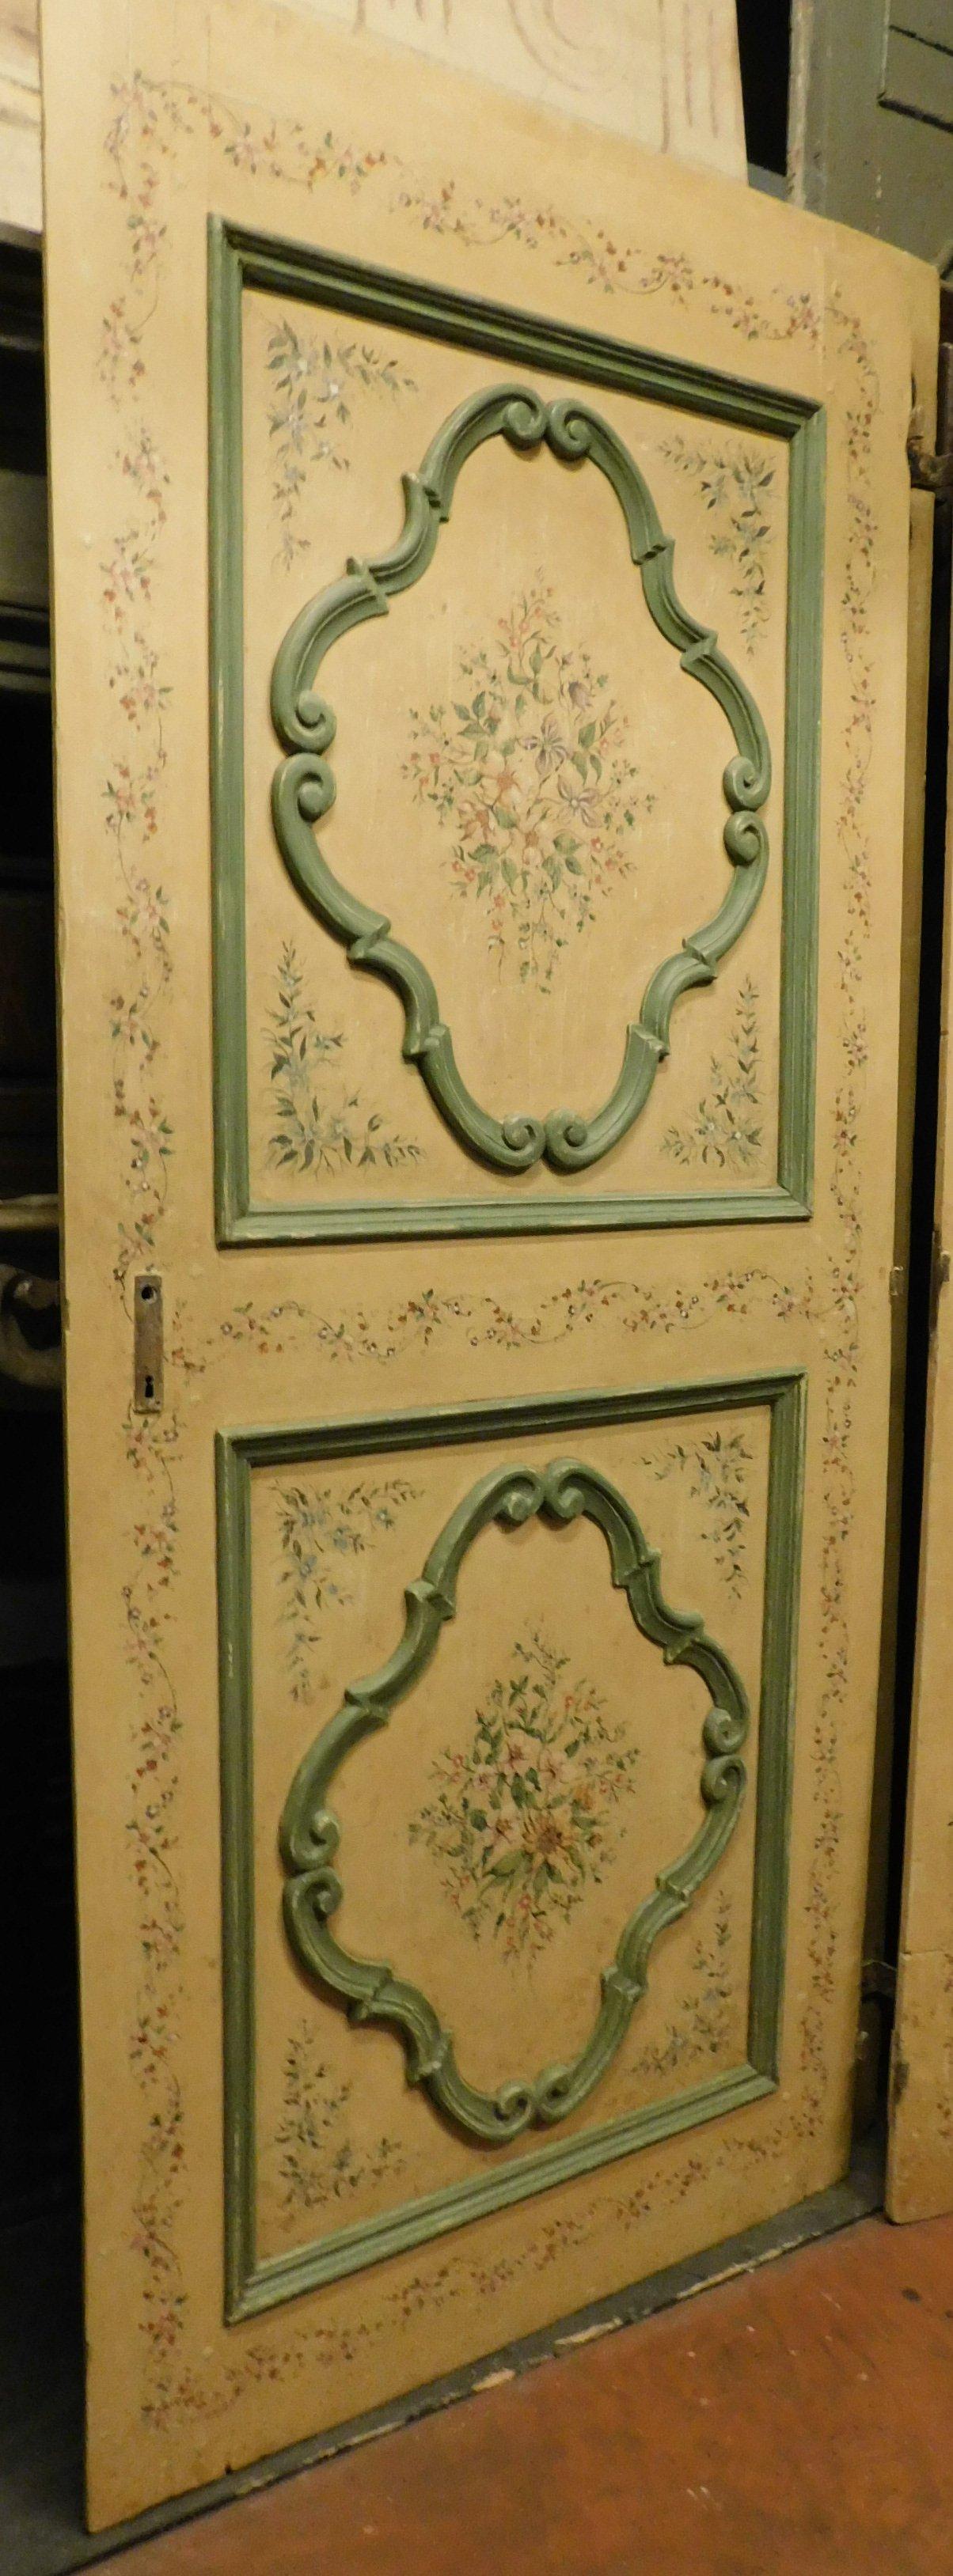 Poplar N.4 Antique Interior Doors Painted Lacquered, Double-Faced, 18th Century Italy For Sale